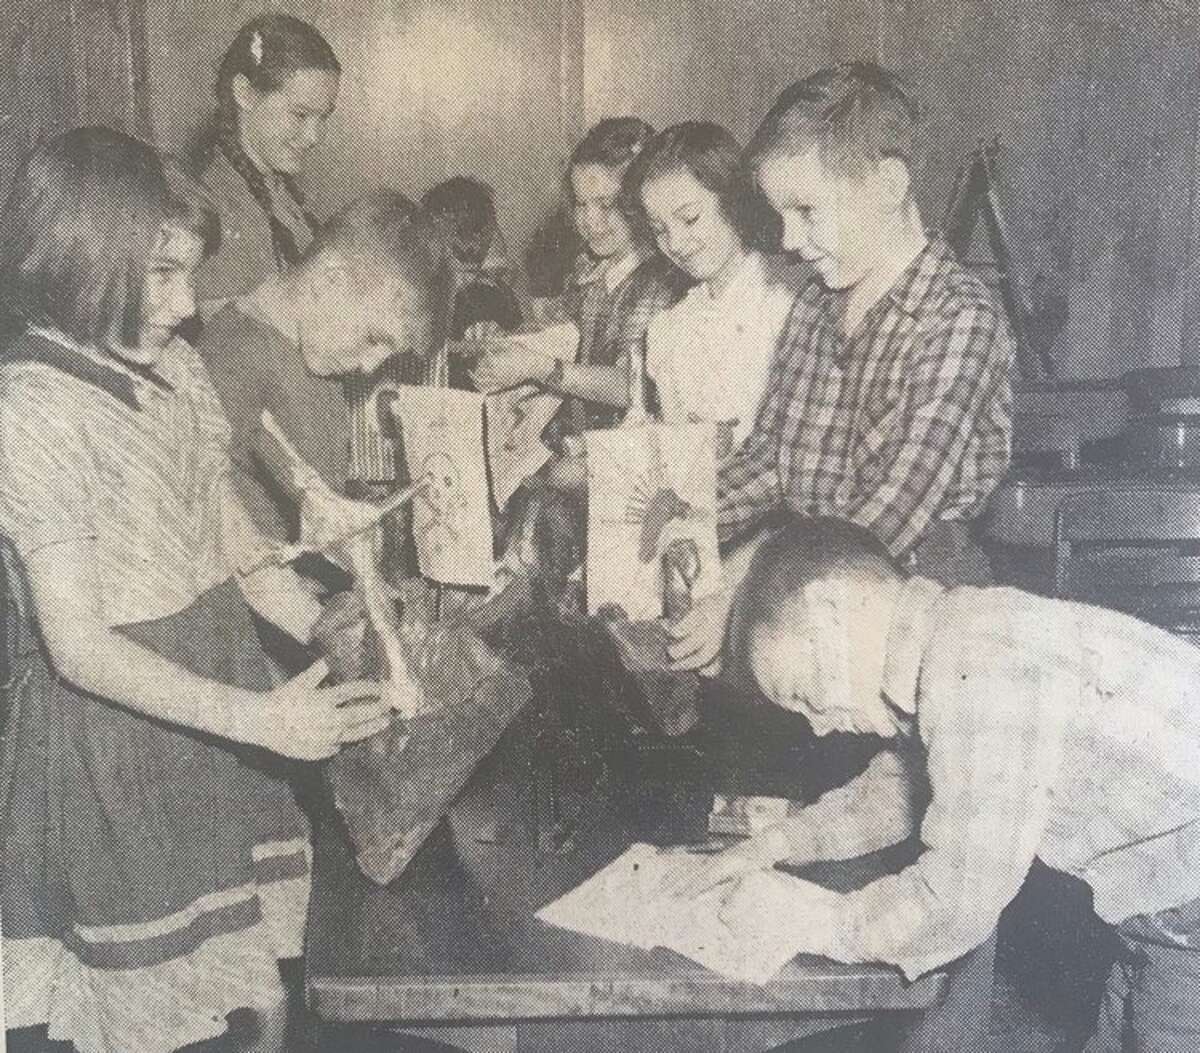 Norwegian Vikings, as part of a unit on Norway, is the topic studied by pupils in Virgina Farnham's fourth grade class at Eastlawn School. From left, Judy Gunterman, Richard Laczko, Helen Mary Spencer, David Wieland, Norma Richardson, Judith German, Walter Woodruff and Lyle Howe. January 1949